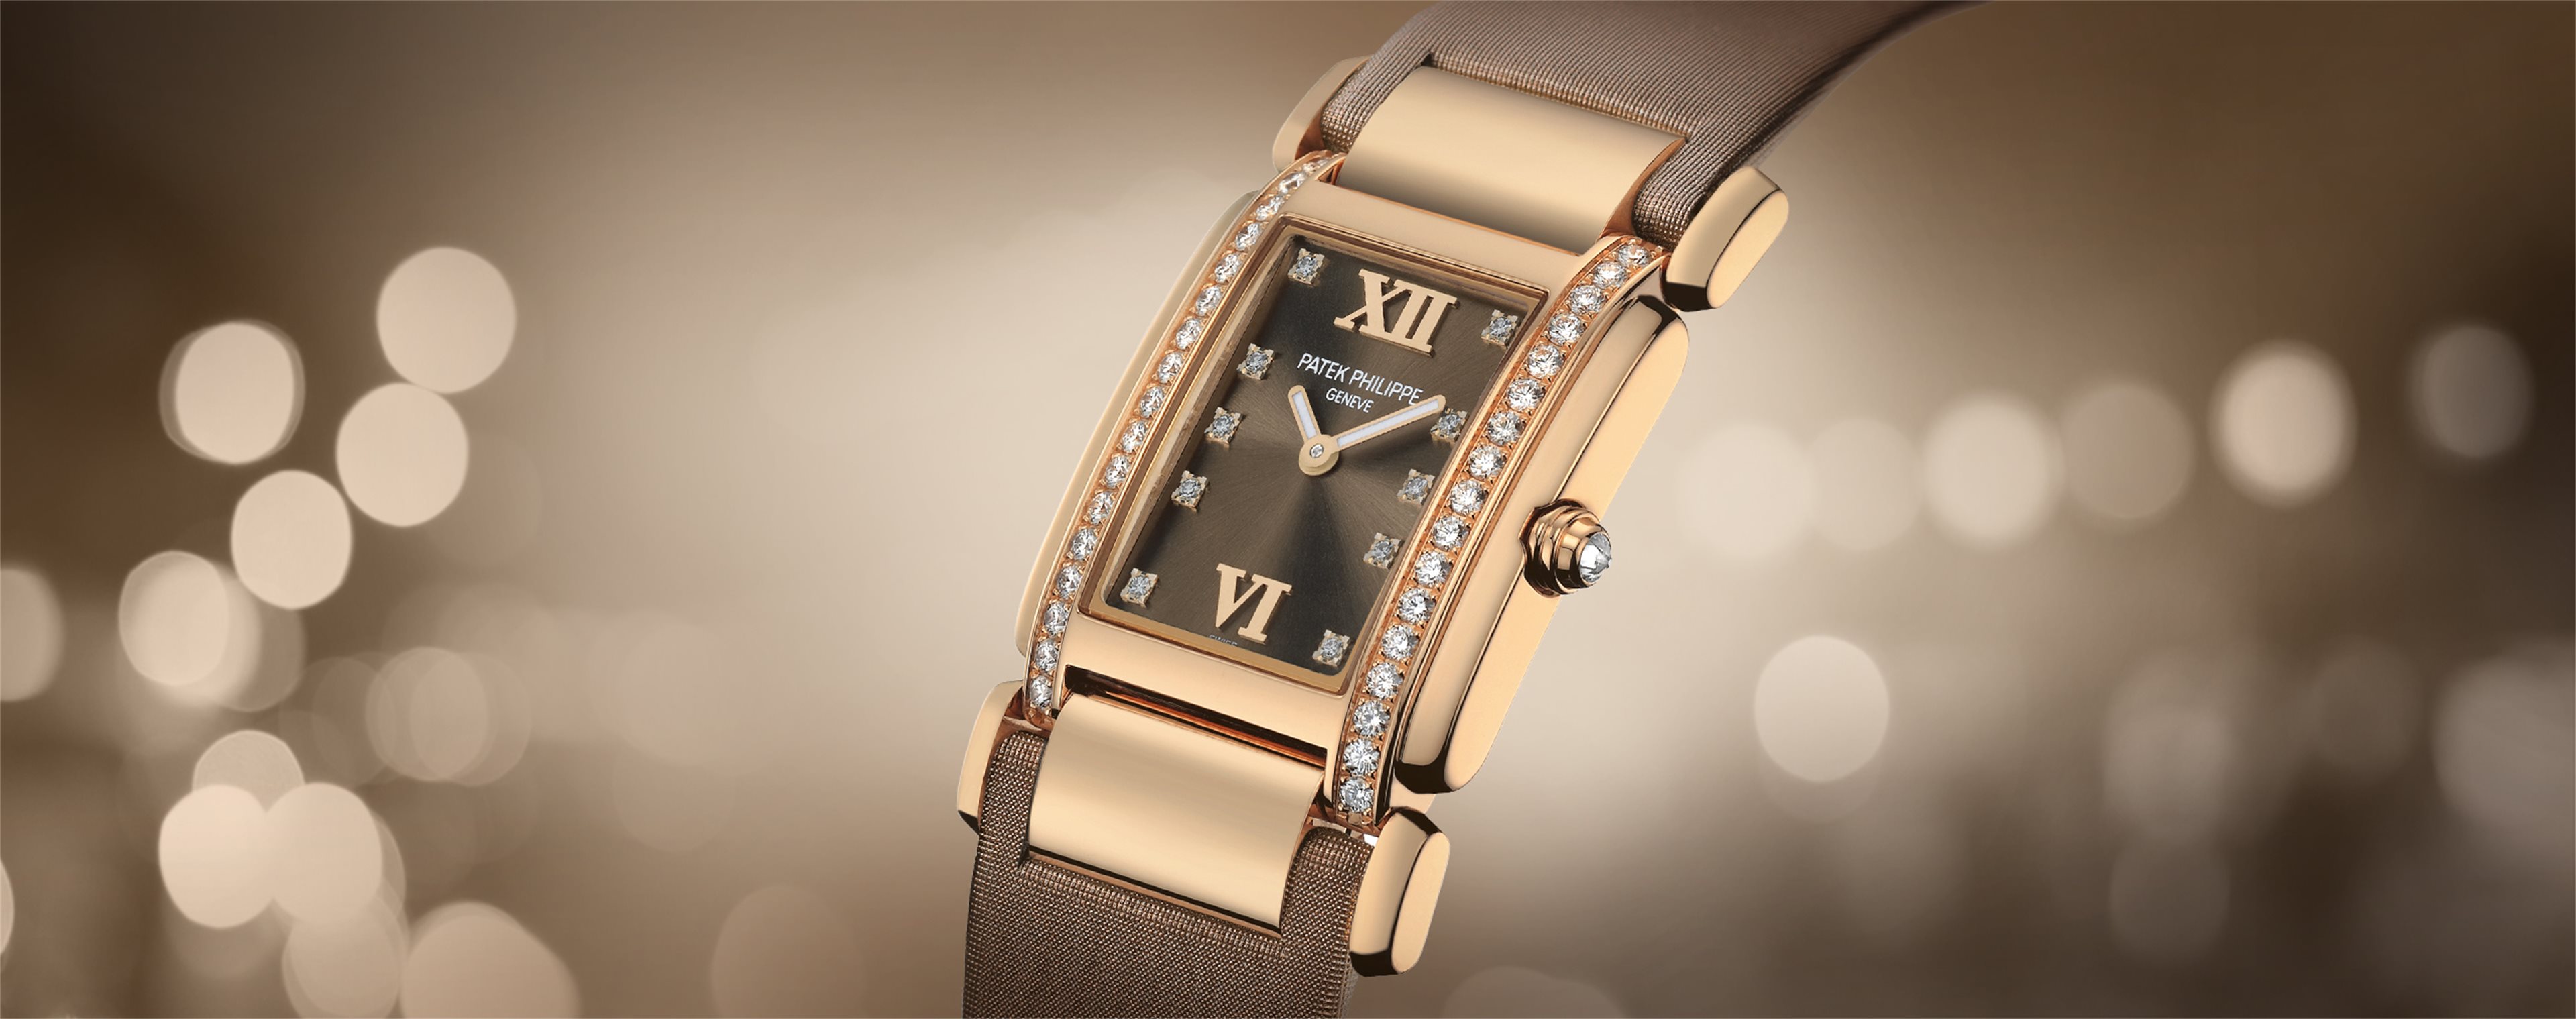 Patek Philippe Tiffany Artistic 18 k Gold with Diamonds Limited Edition Museum Watch